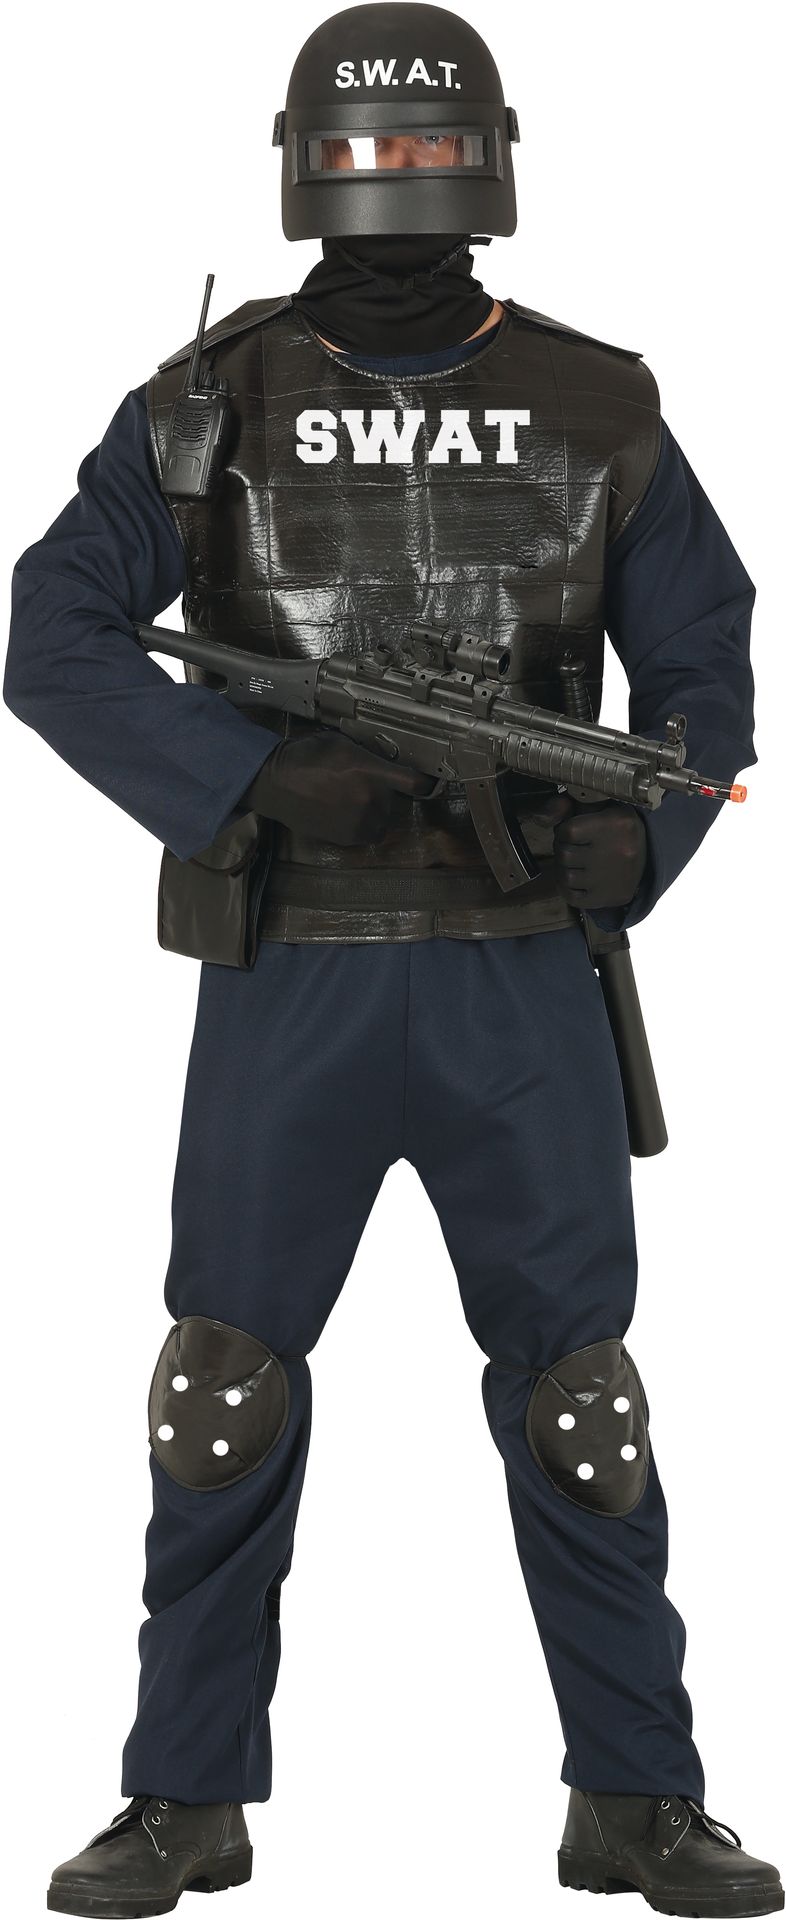 Stoere SWAT outfit